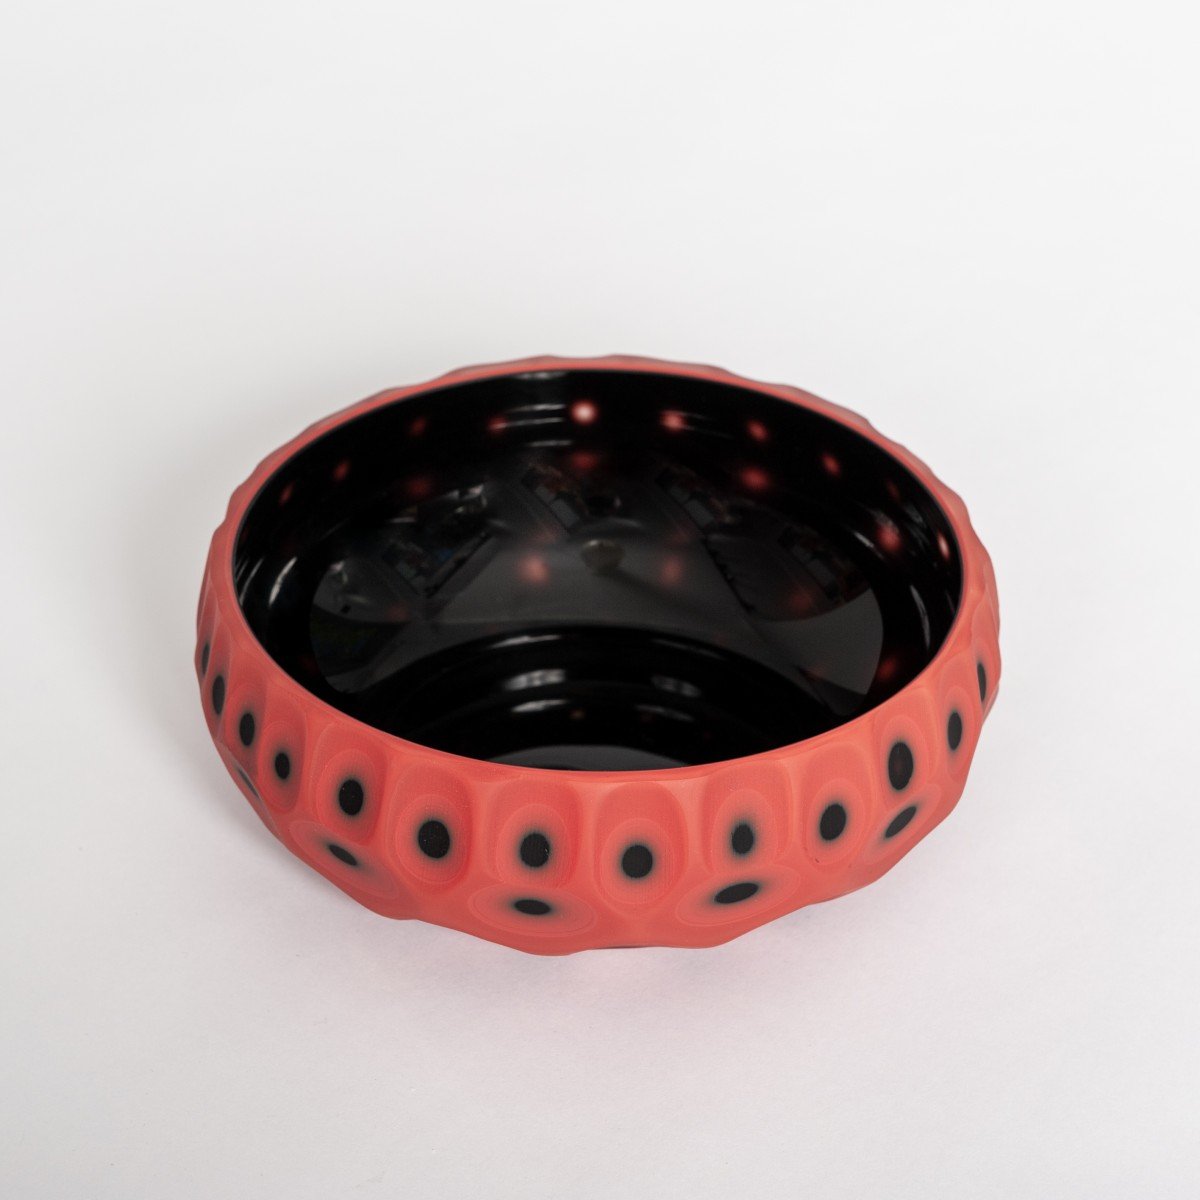 Pair Of Very Decorative Murano Glass Bowls In The Colors Coral-black With Matt Surface And Battuto Decor By Afro Celotto-photo-3